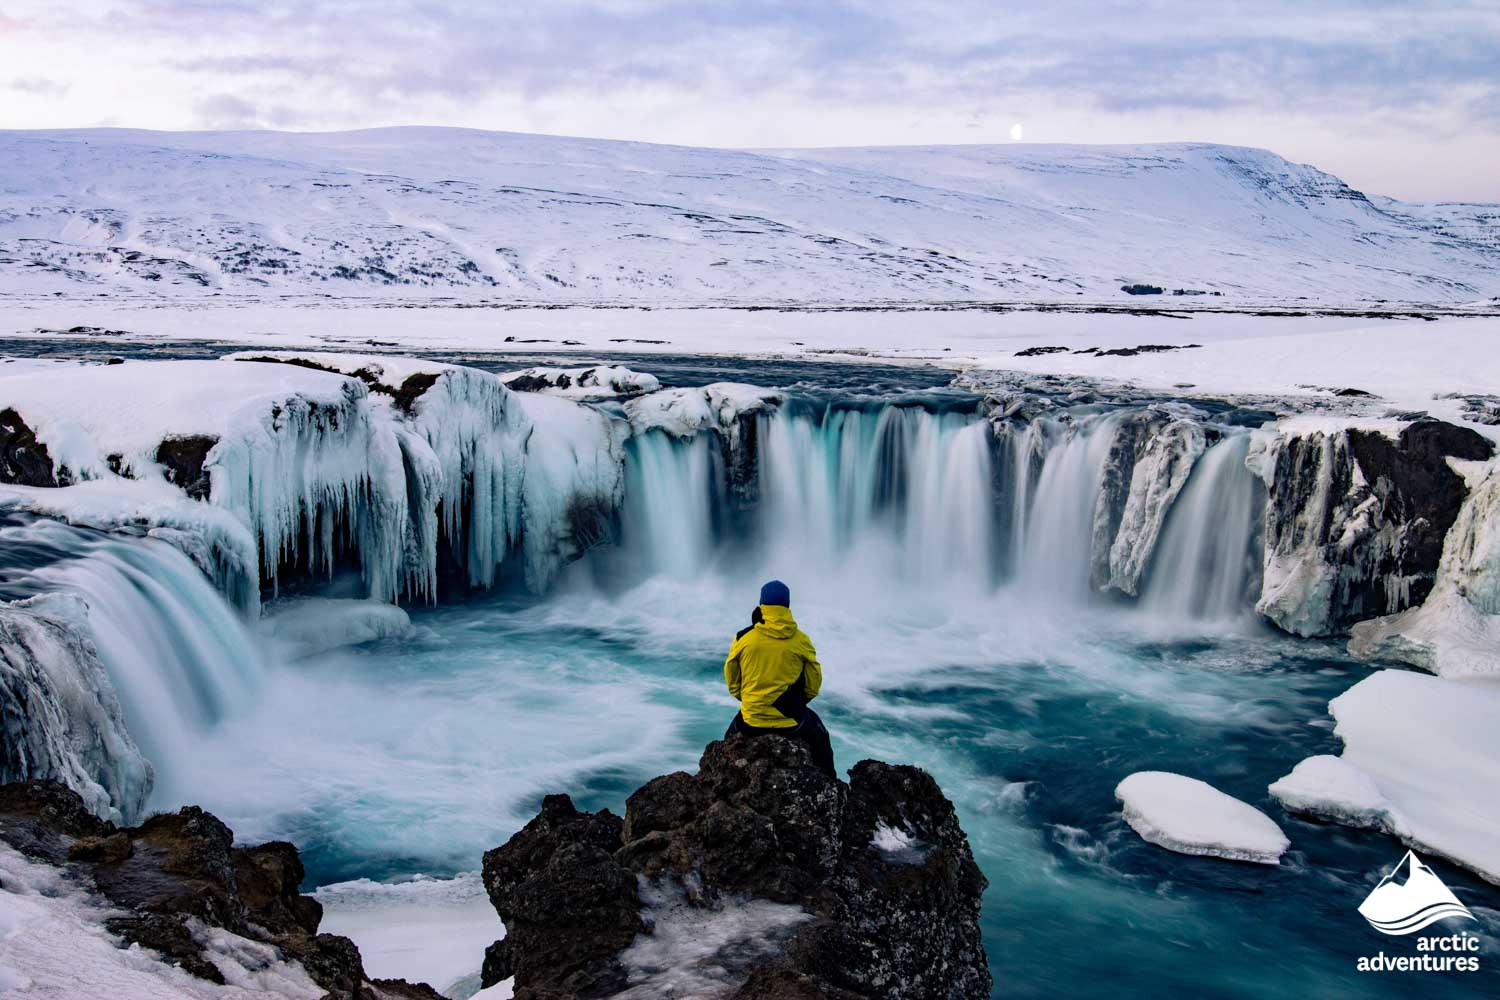 Mistake Fare - Airfare To Iceland The Land of Fire & Ice $274 Round Trip